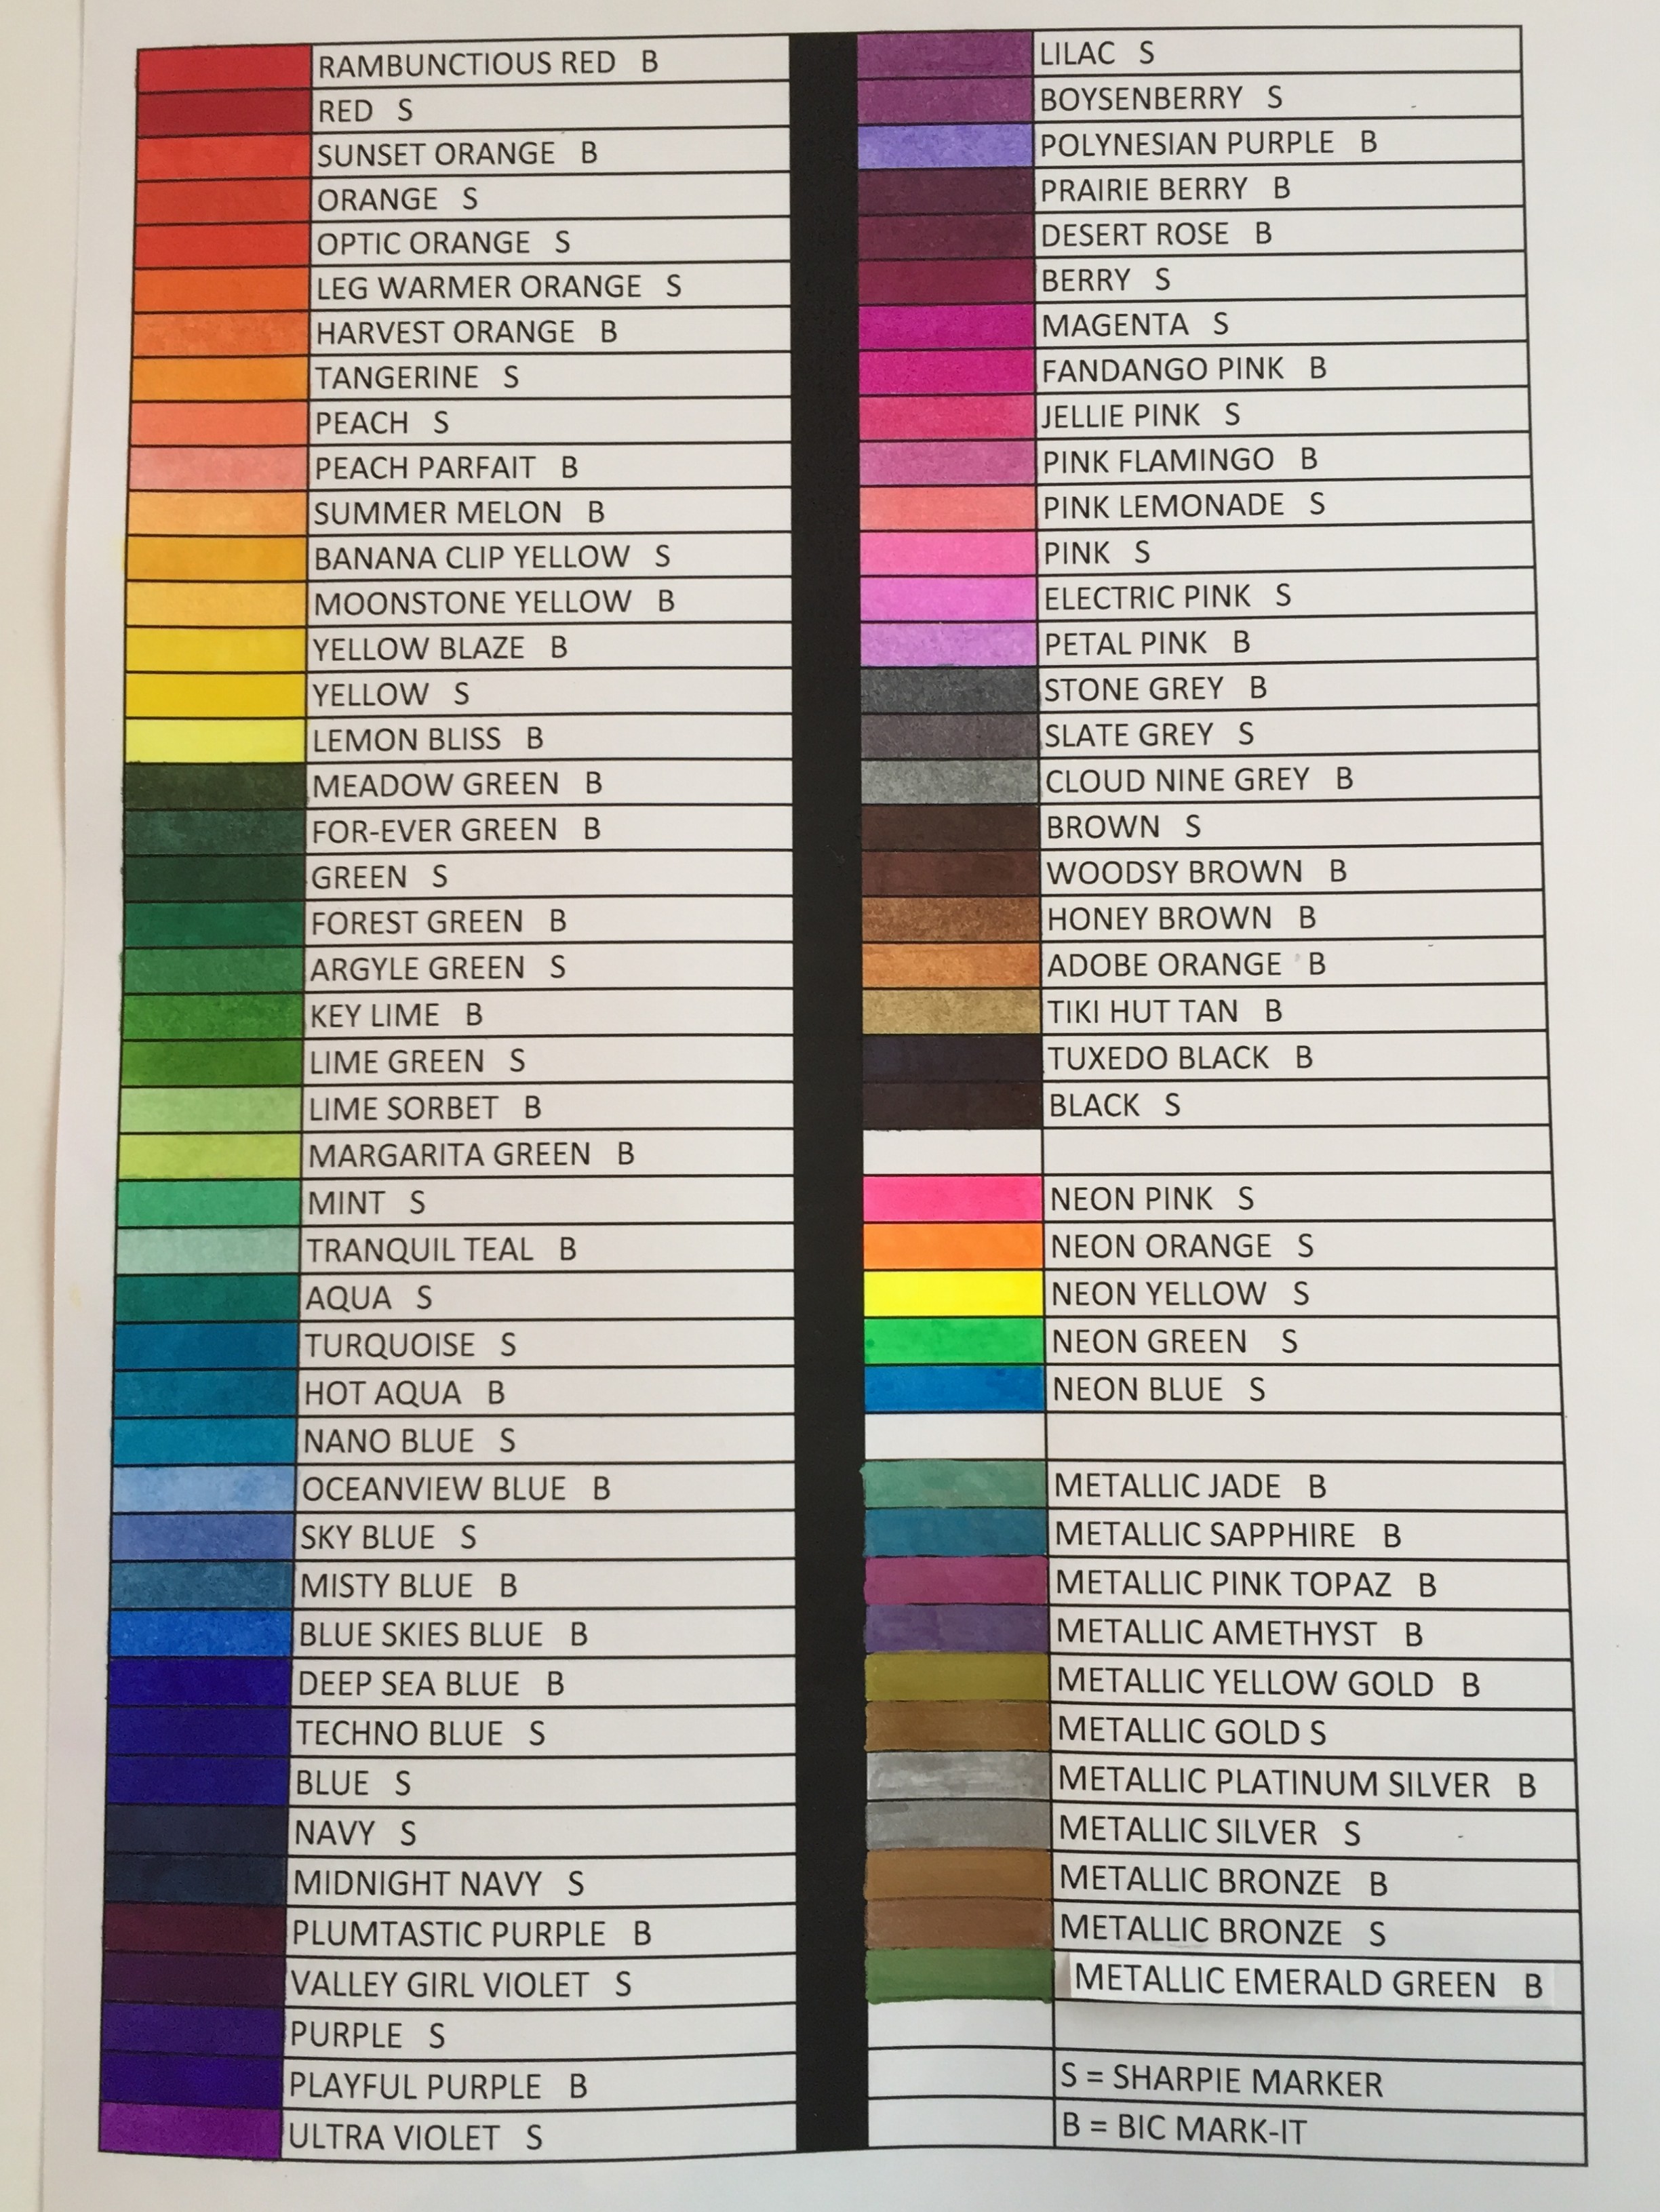 Color chart for sharpie and bic mark